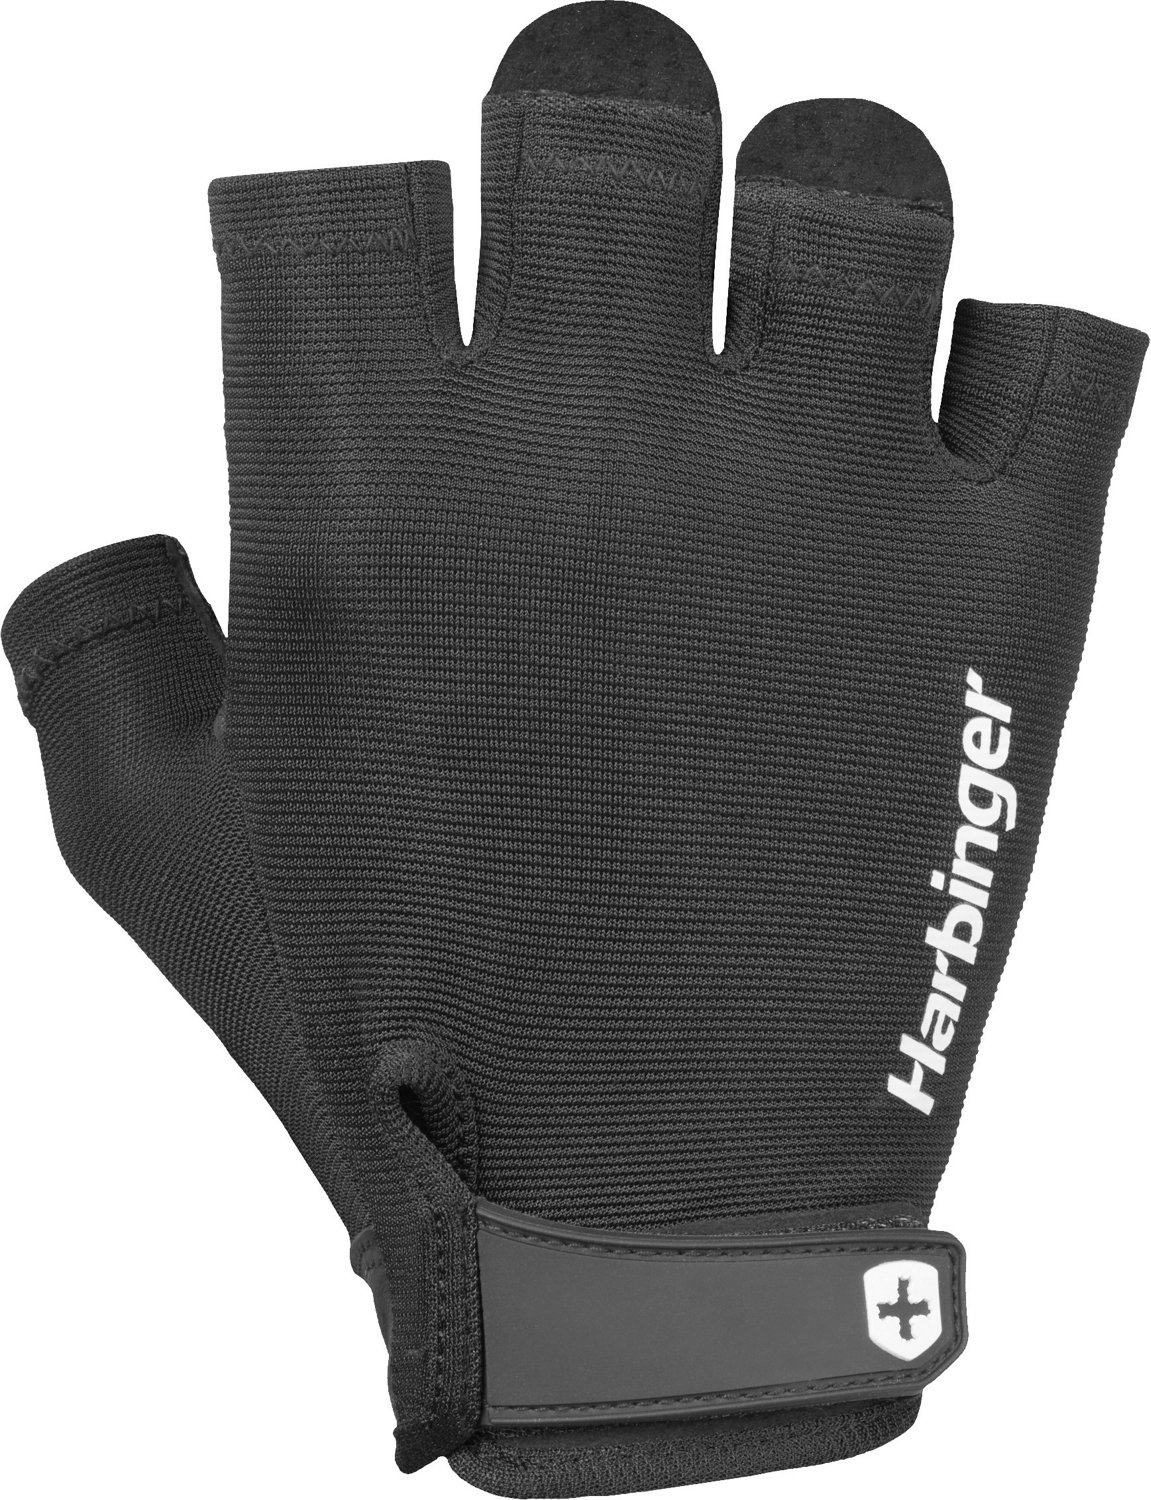 Buy Women's Weight Lifting Gloves Online